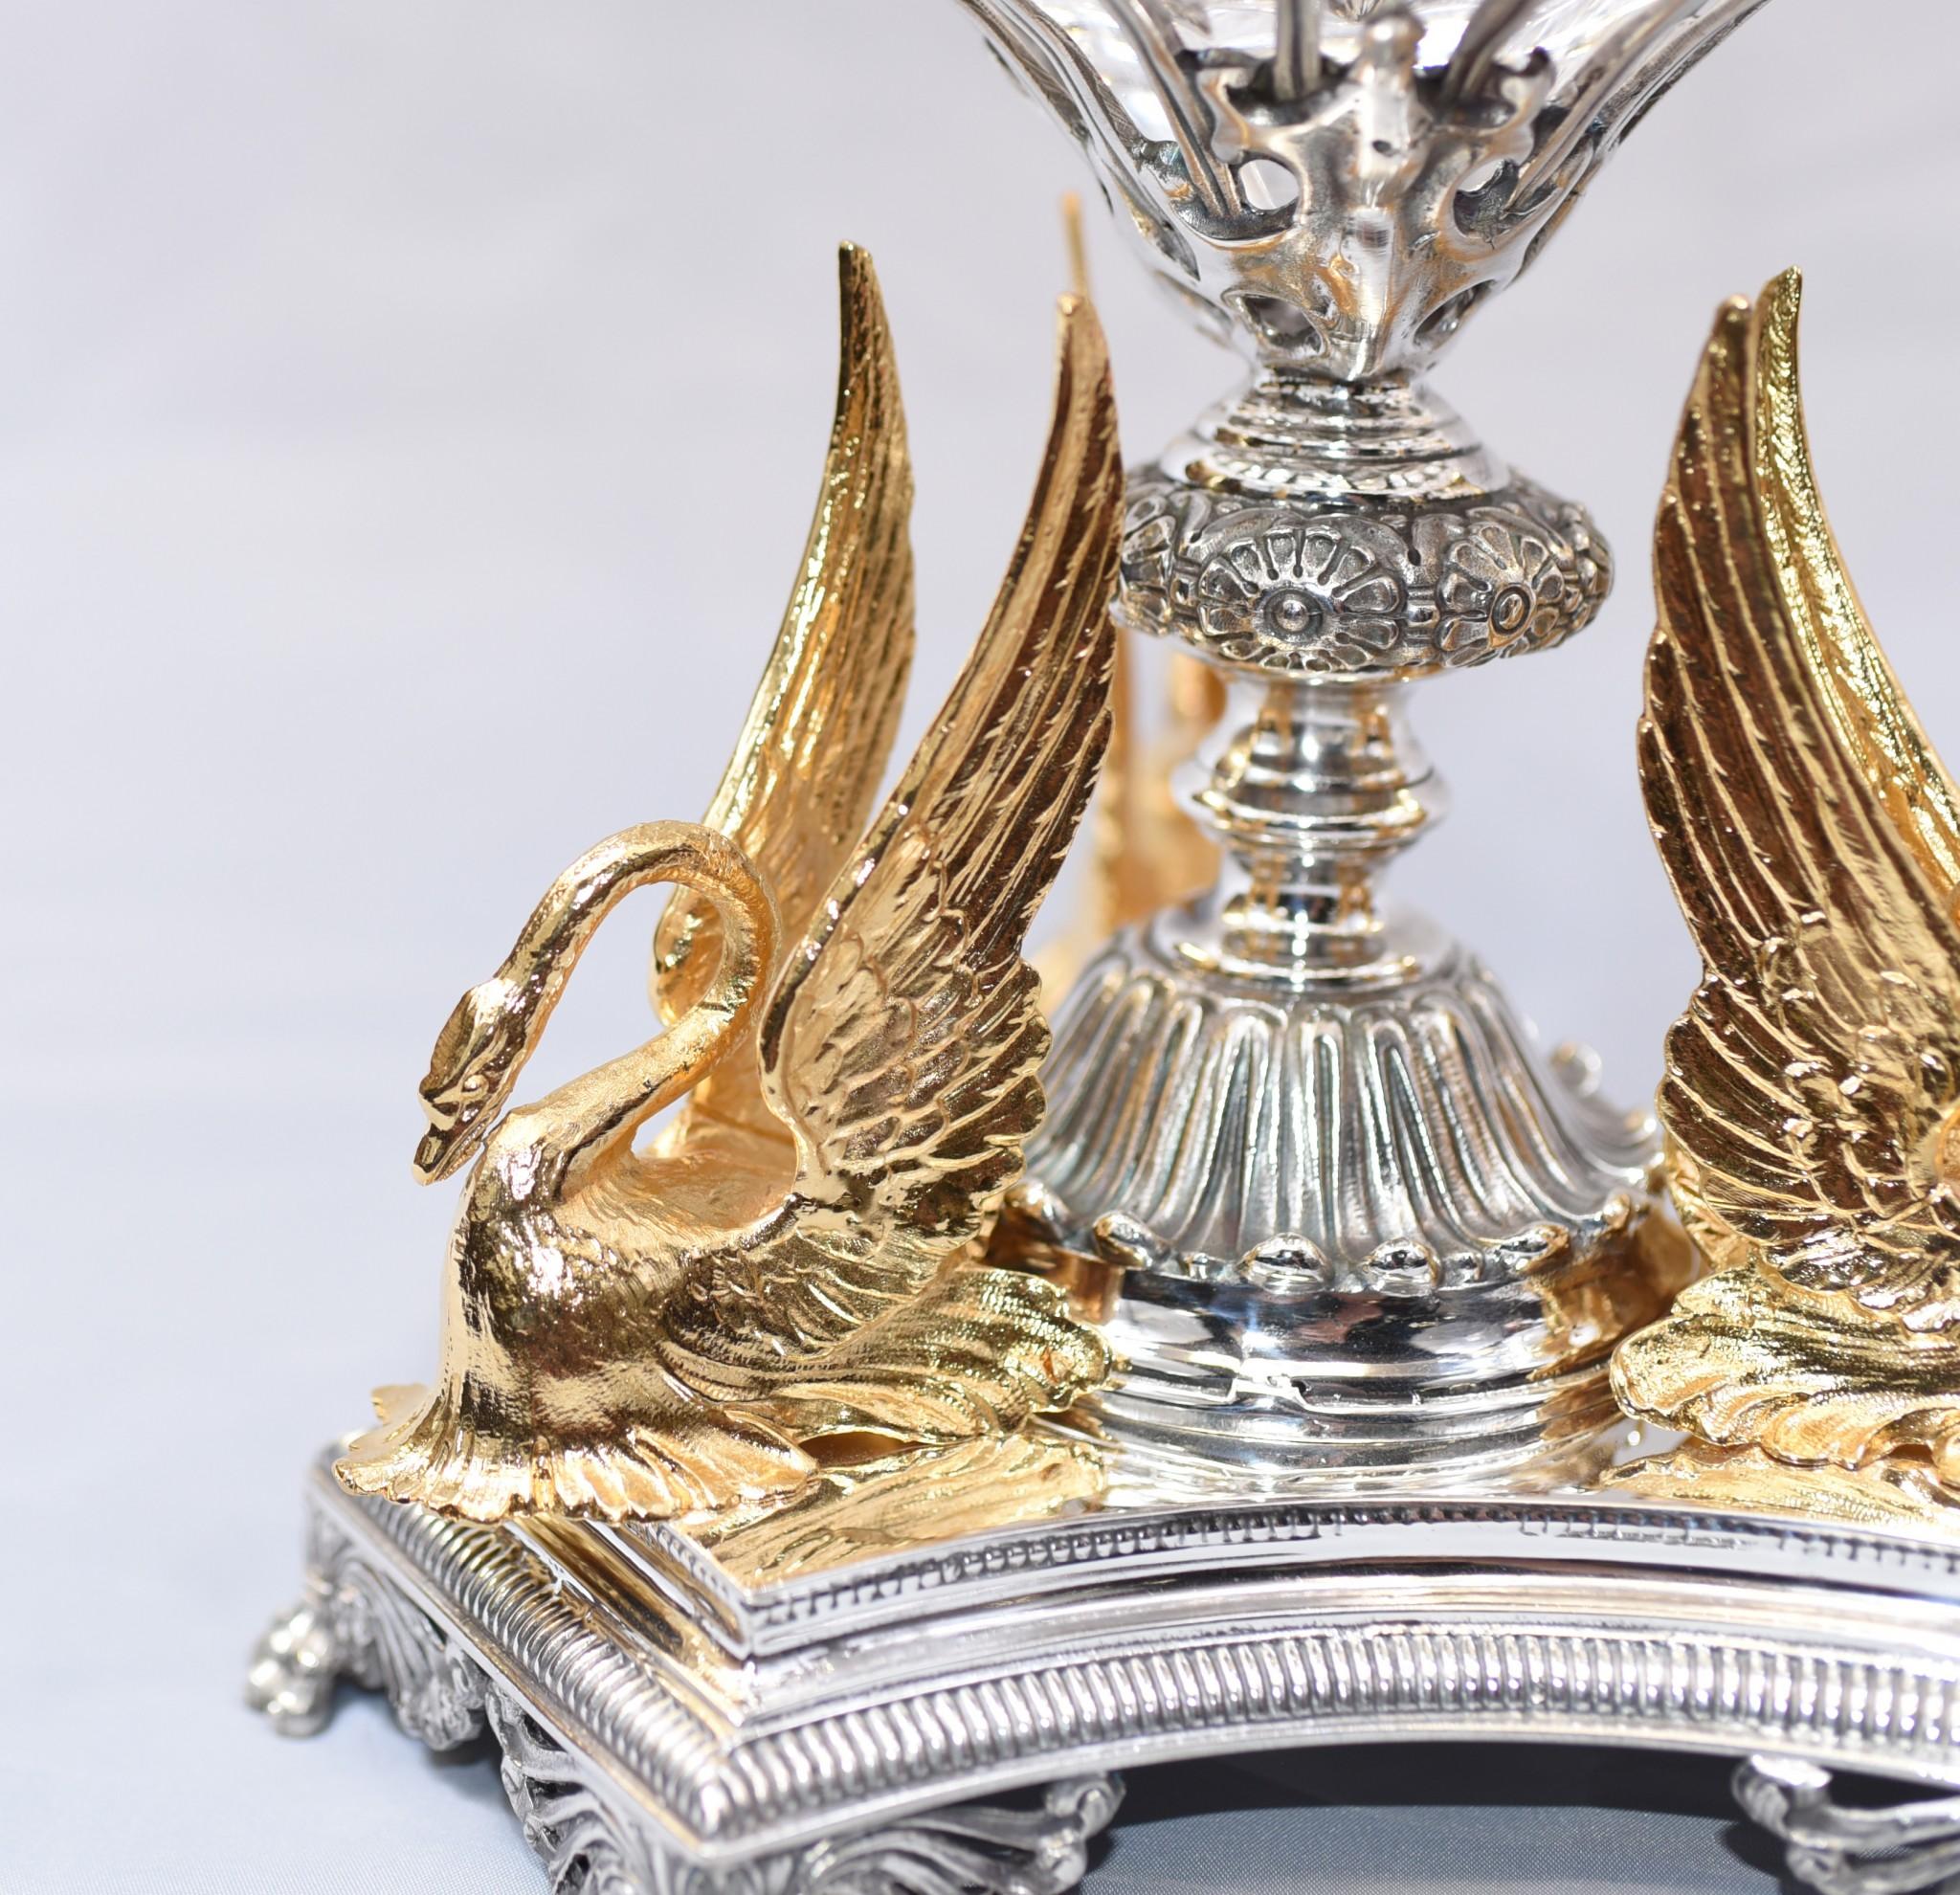 - Stunning pair of English Sheffield silver plate epergnes or dishes
- Main visual draw of course are the gilt swans supporting the cut glass crystal dish - simply exquisite
- These could raise the bar for any chips and salsa party!
- Silver